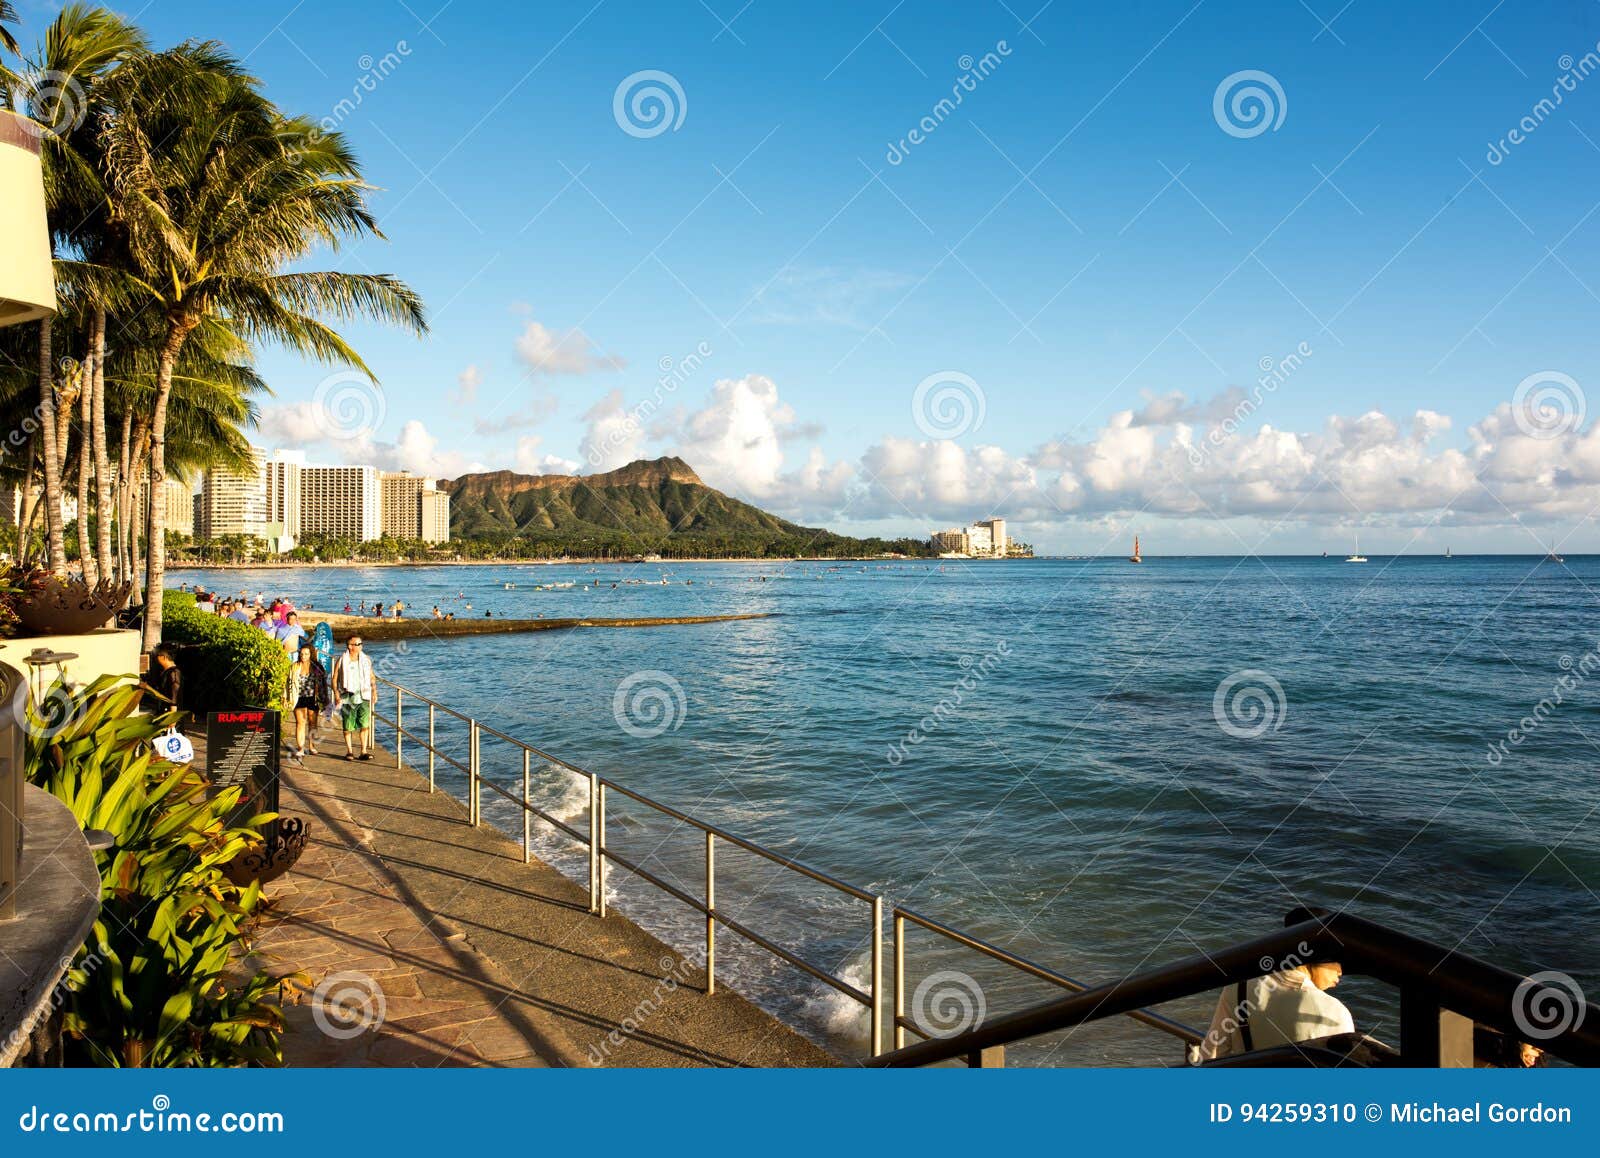 Waikiki in the State of Hawaii. Editorial Image - Image of historical